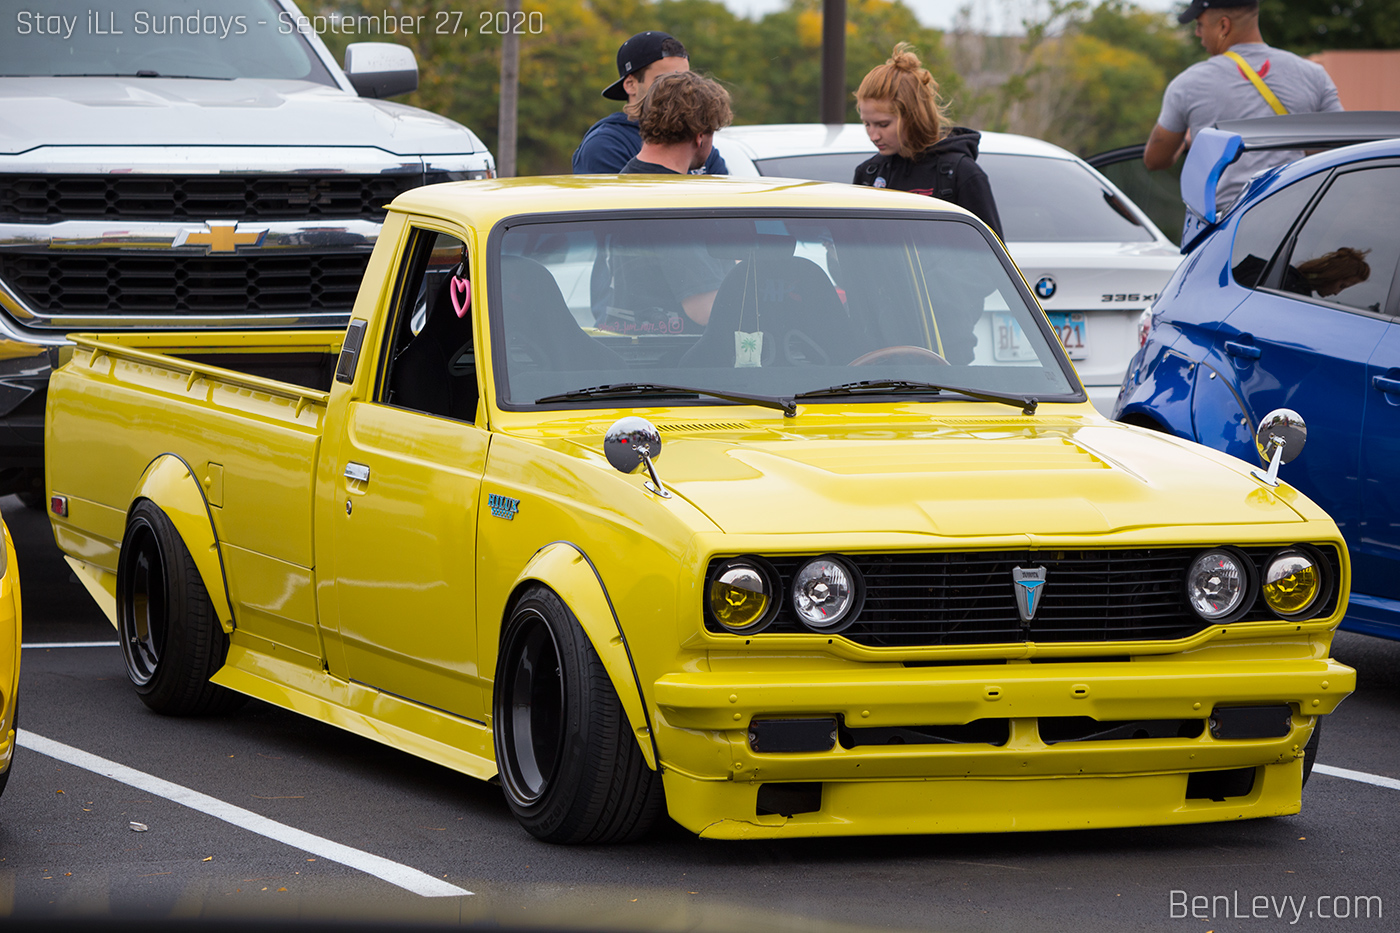 Yellow 1978 Toyota Hilux